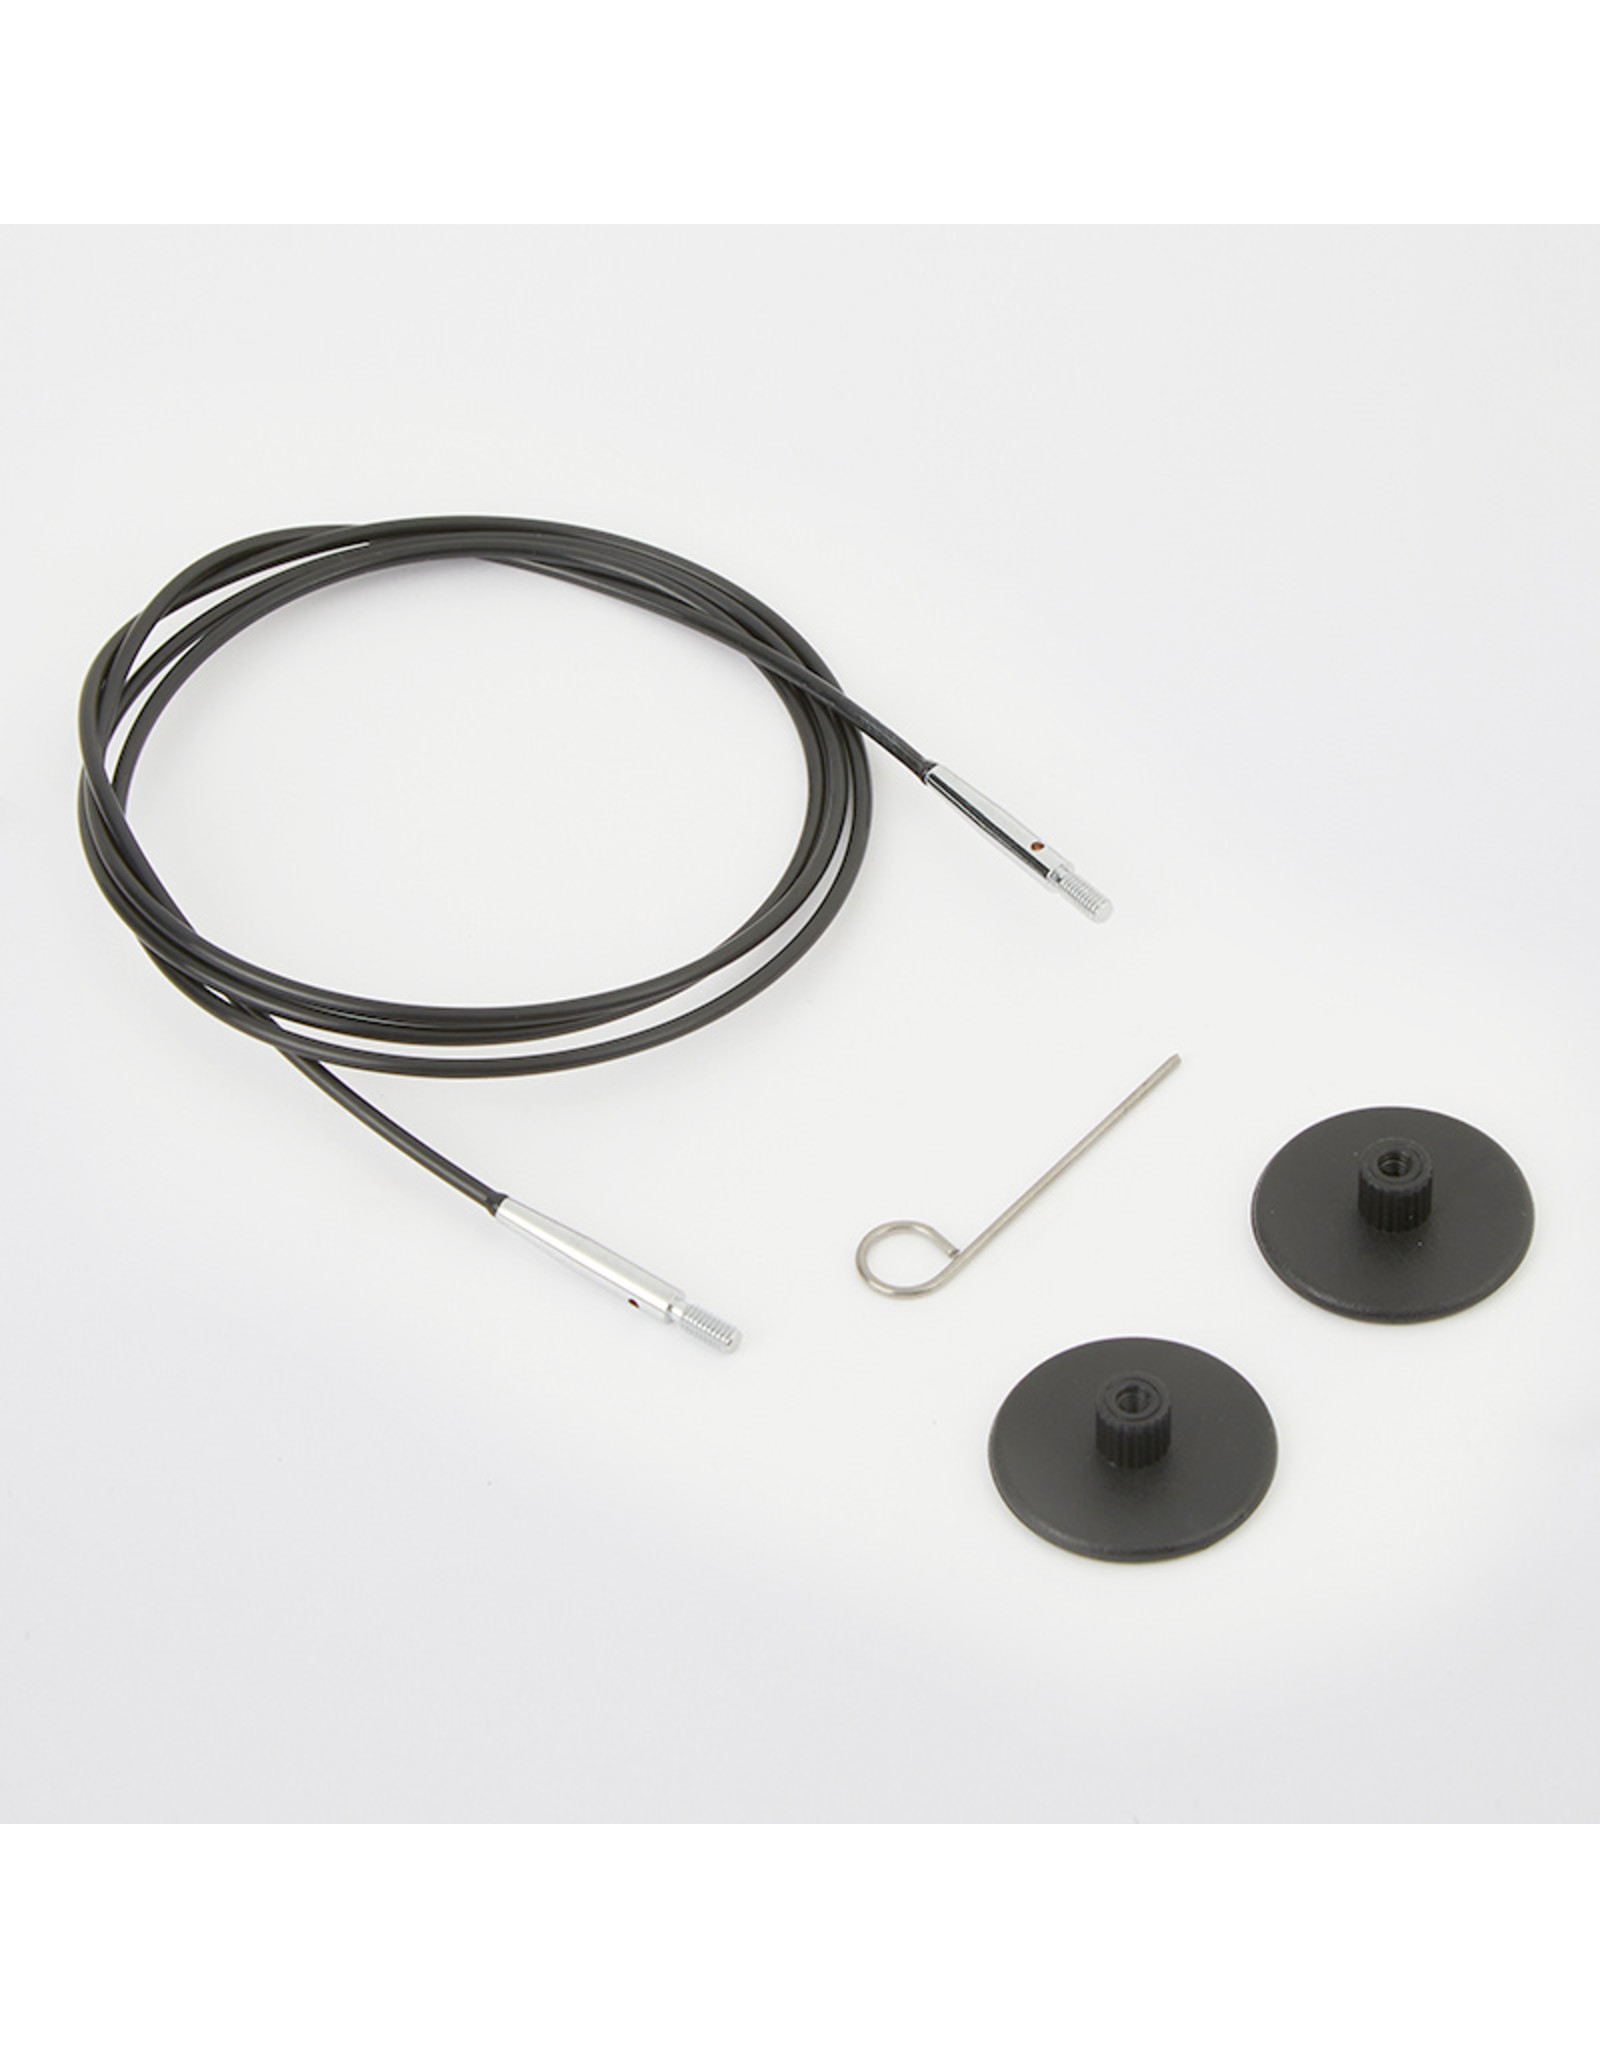 32-inch Cord for Interchangeable Set